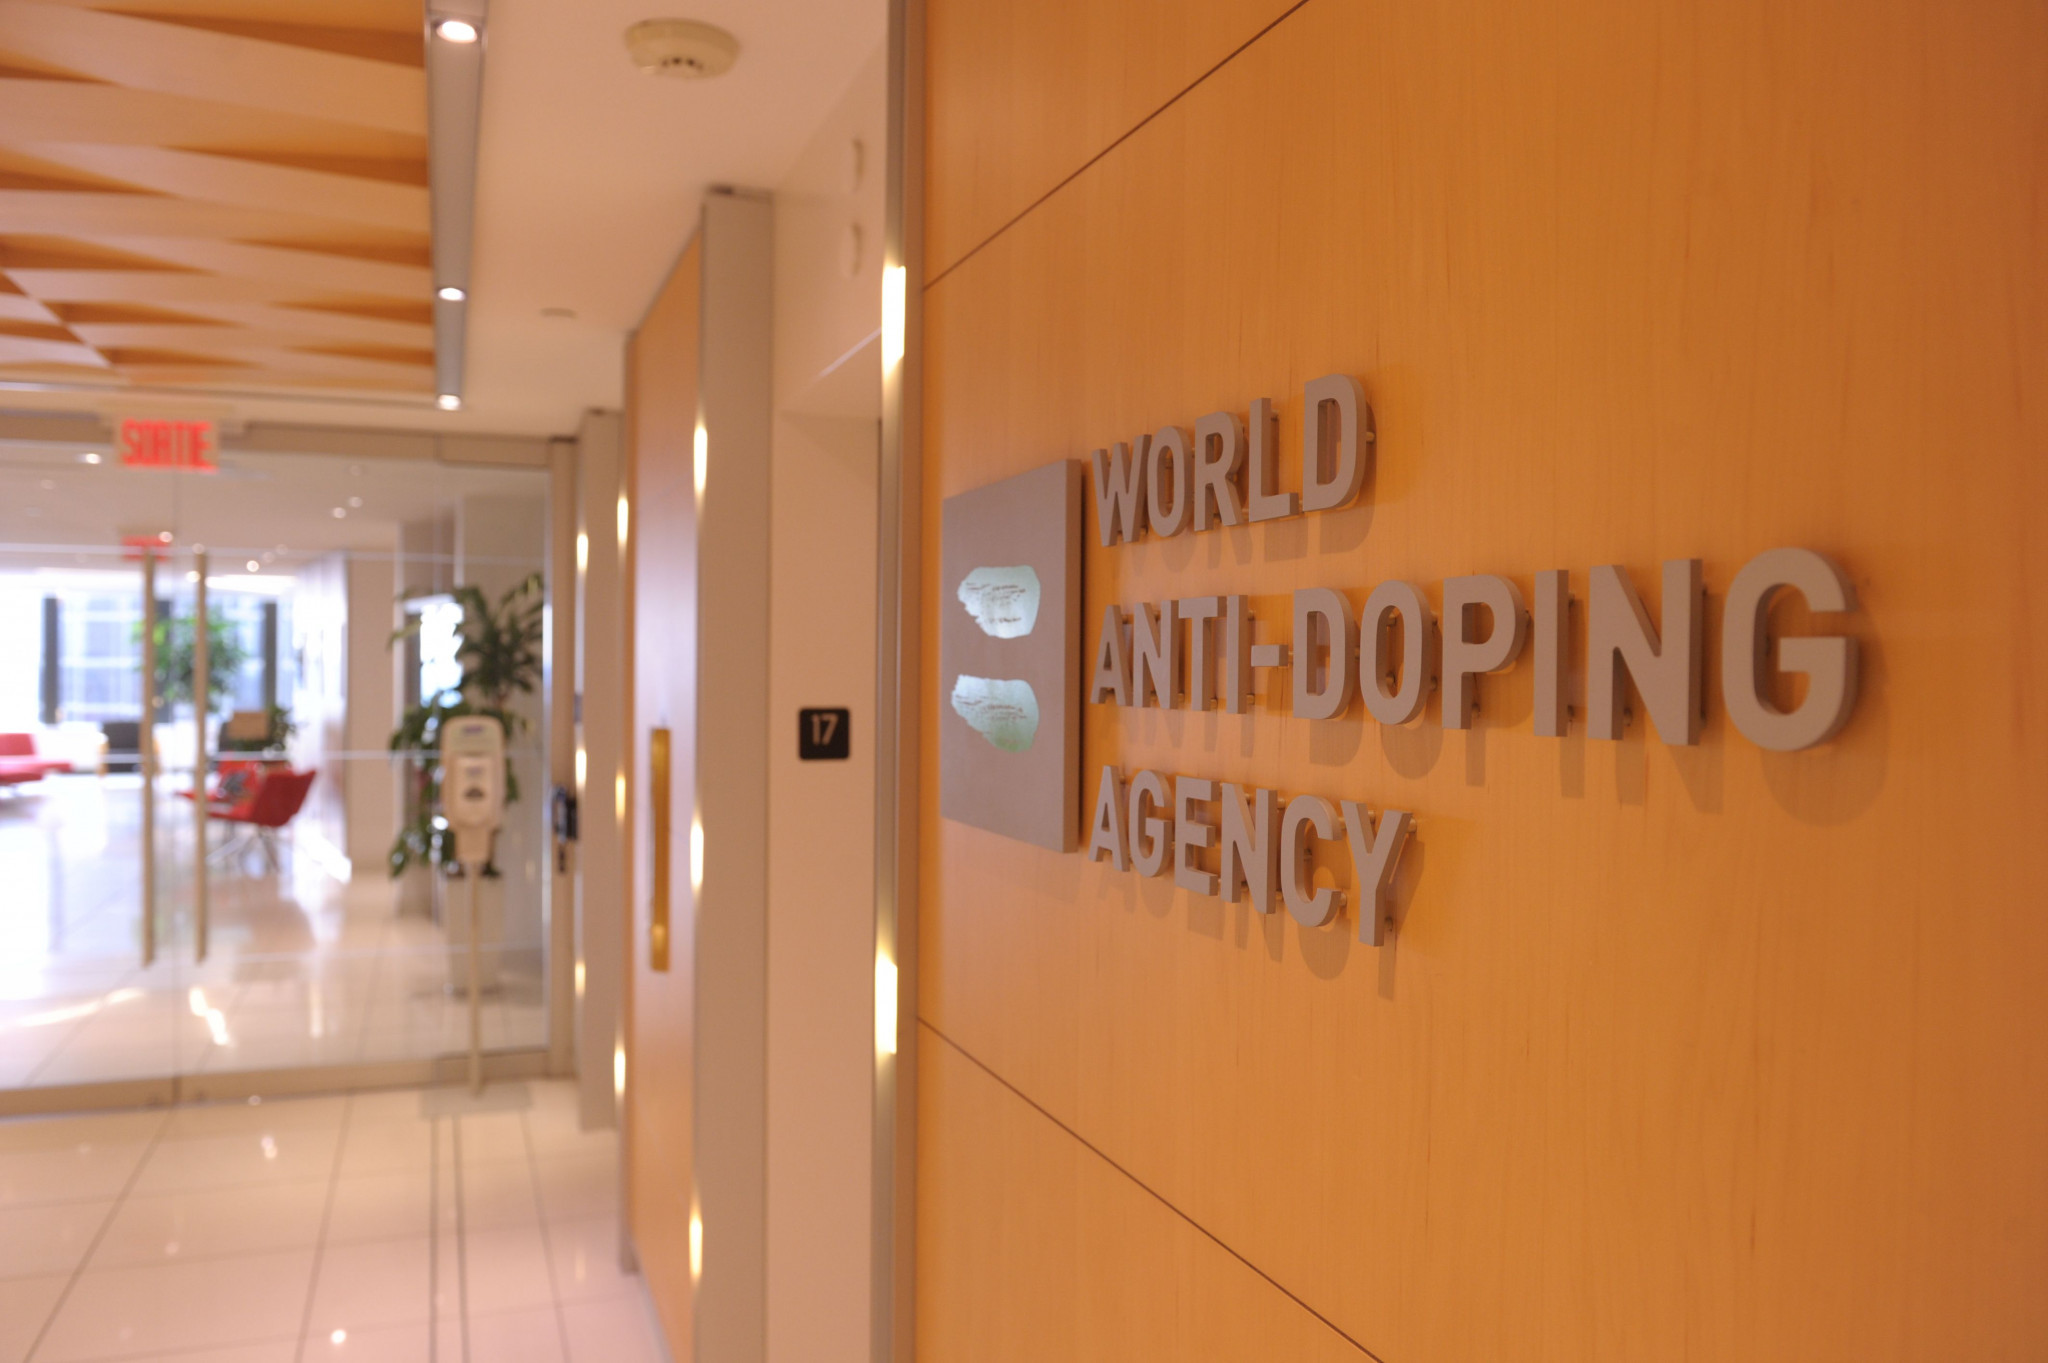 The World Anti-Doping Agency could declare the Russian Anti-Doping Agency non-compliant again if evidence of tampering is proven ©Getty Images